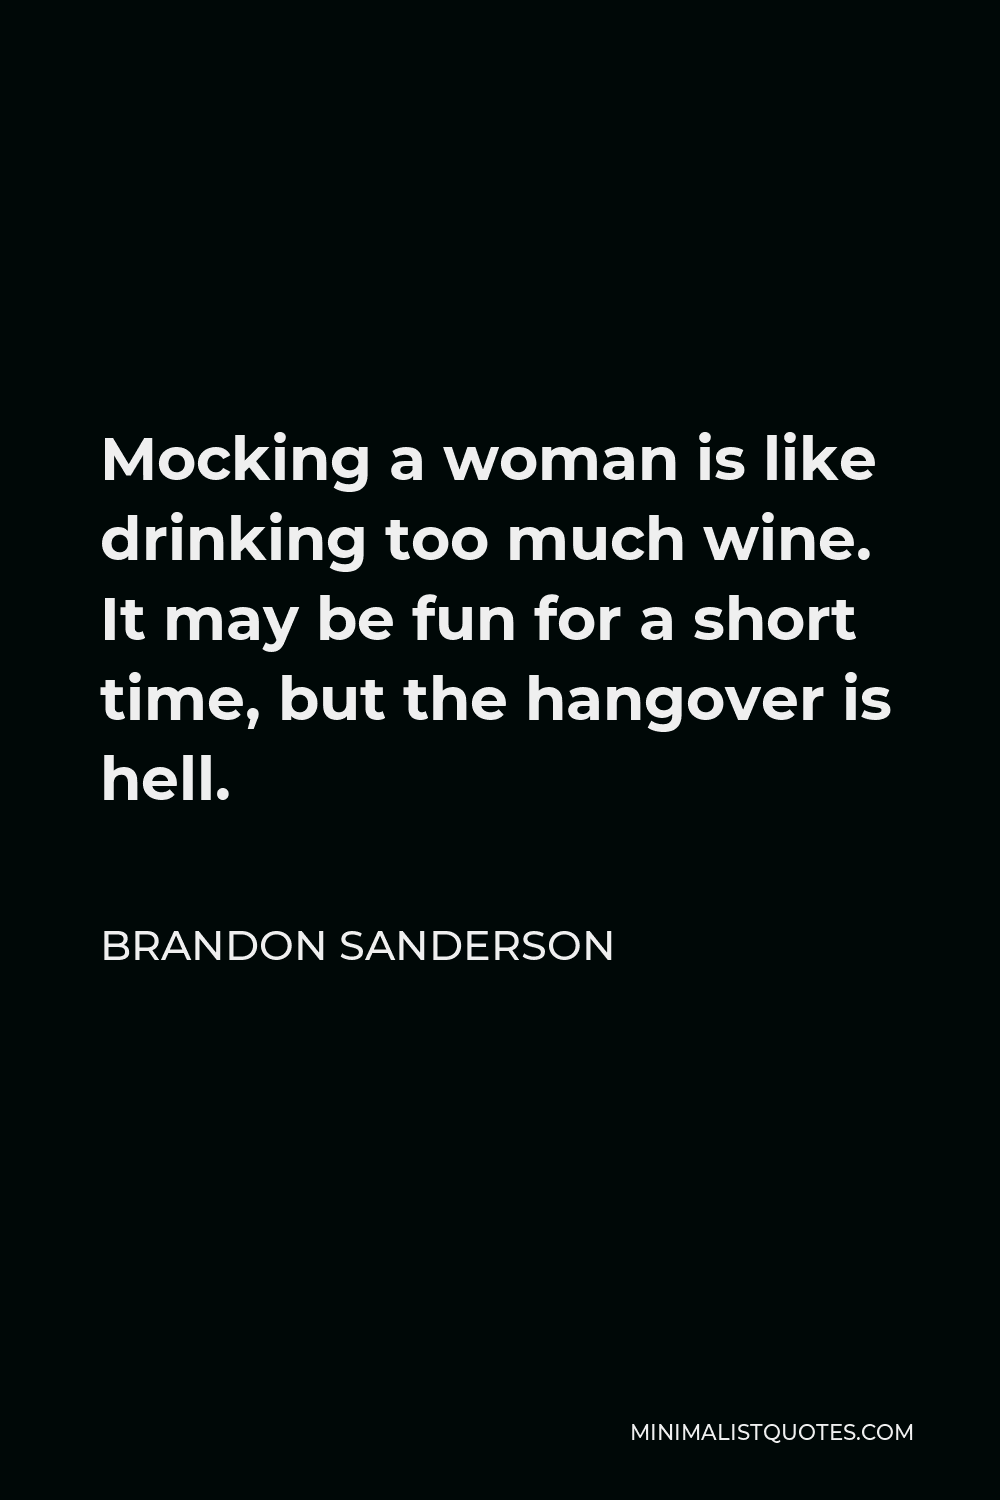 Brandon Sanderson Quote - Mocking a woman is like drinking too much wine. It may be fun for a short time, but the hangover is hell.